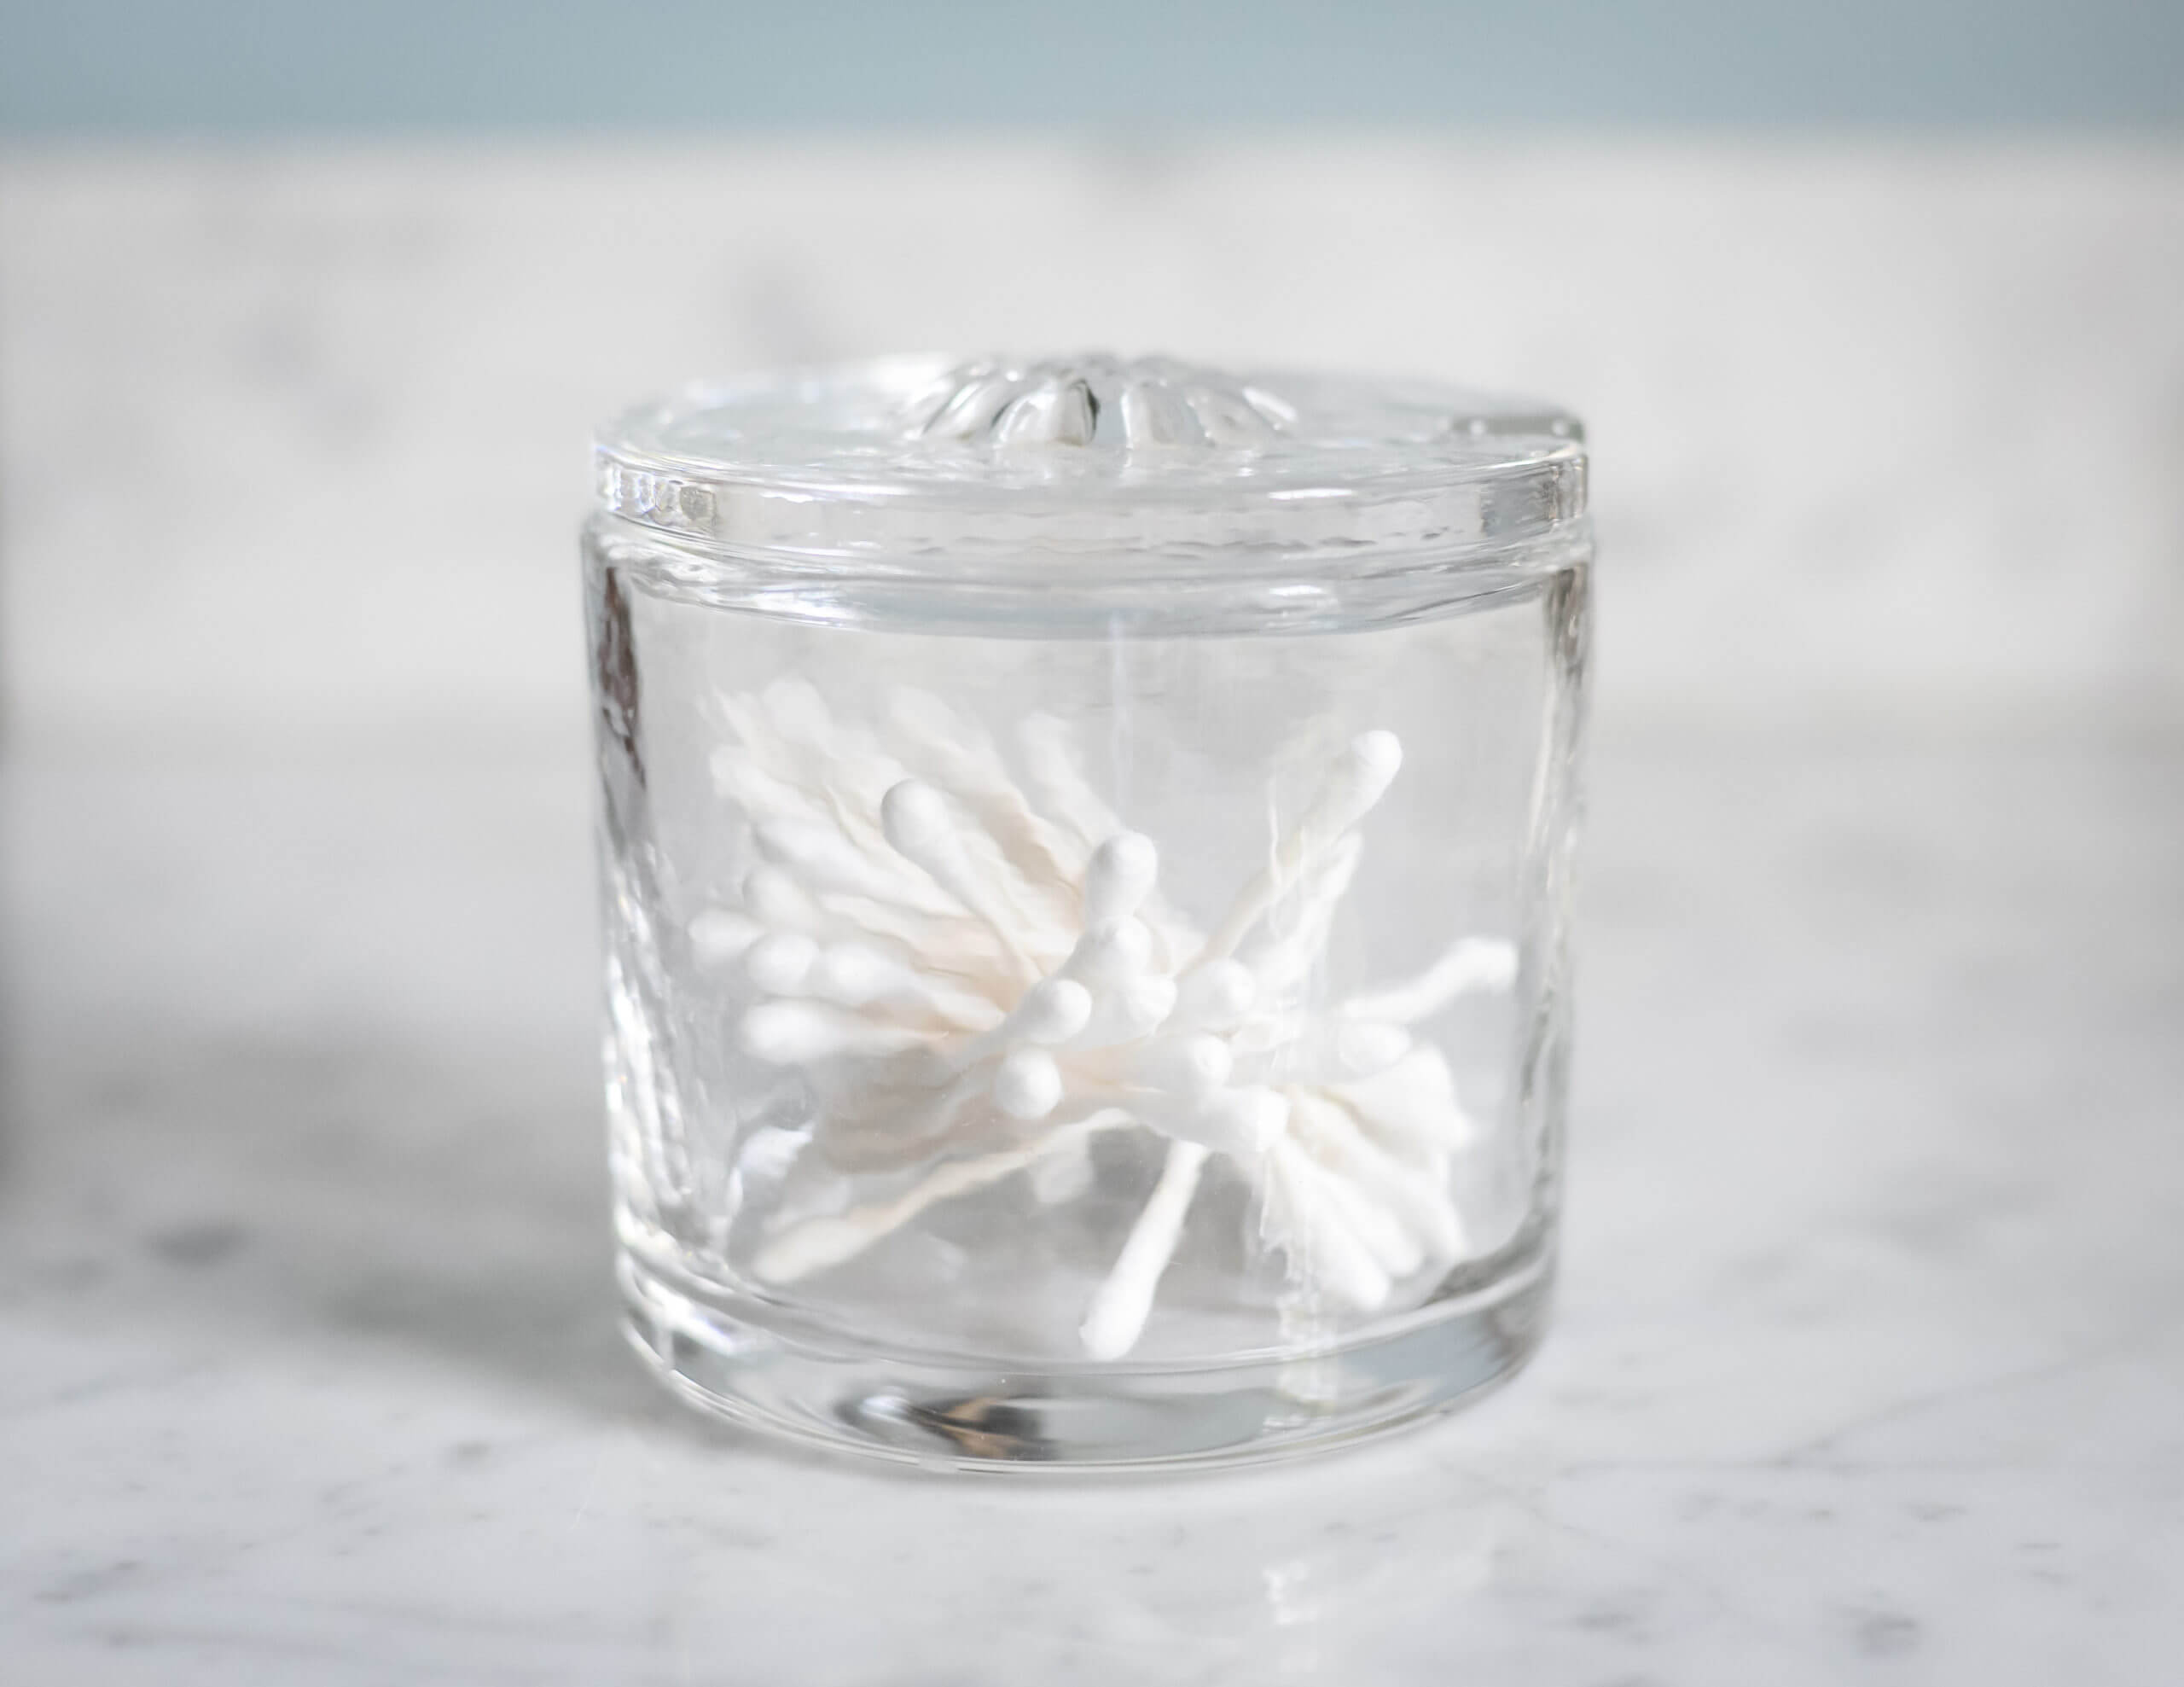 A glass container holds q tips.